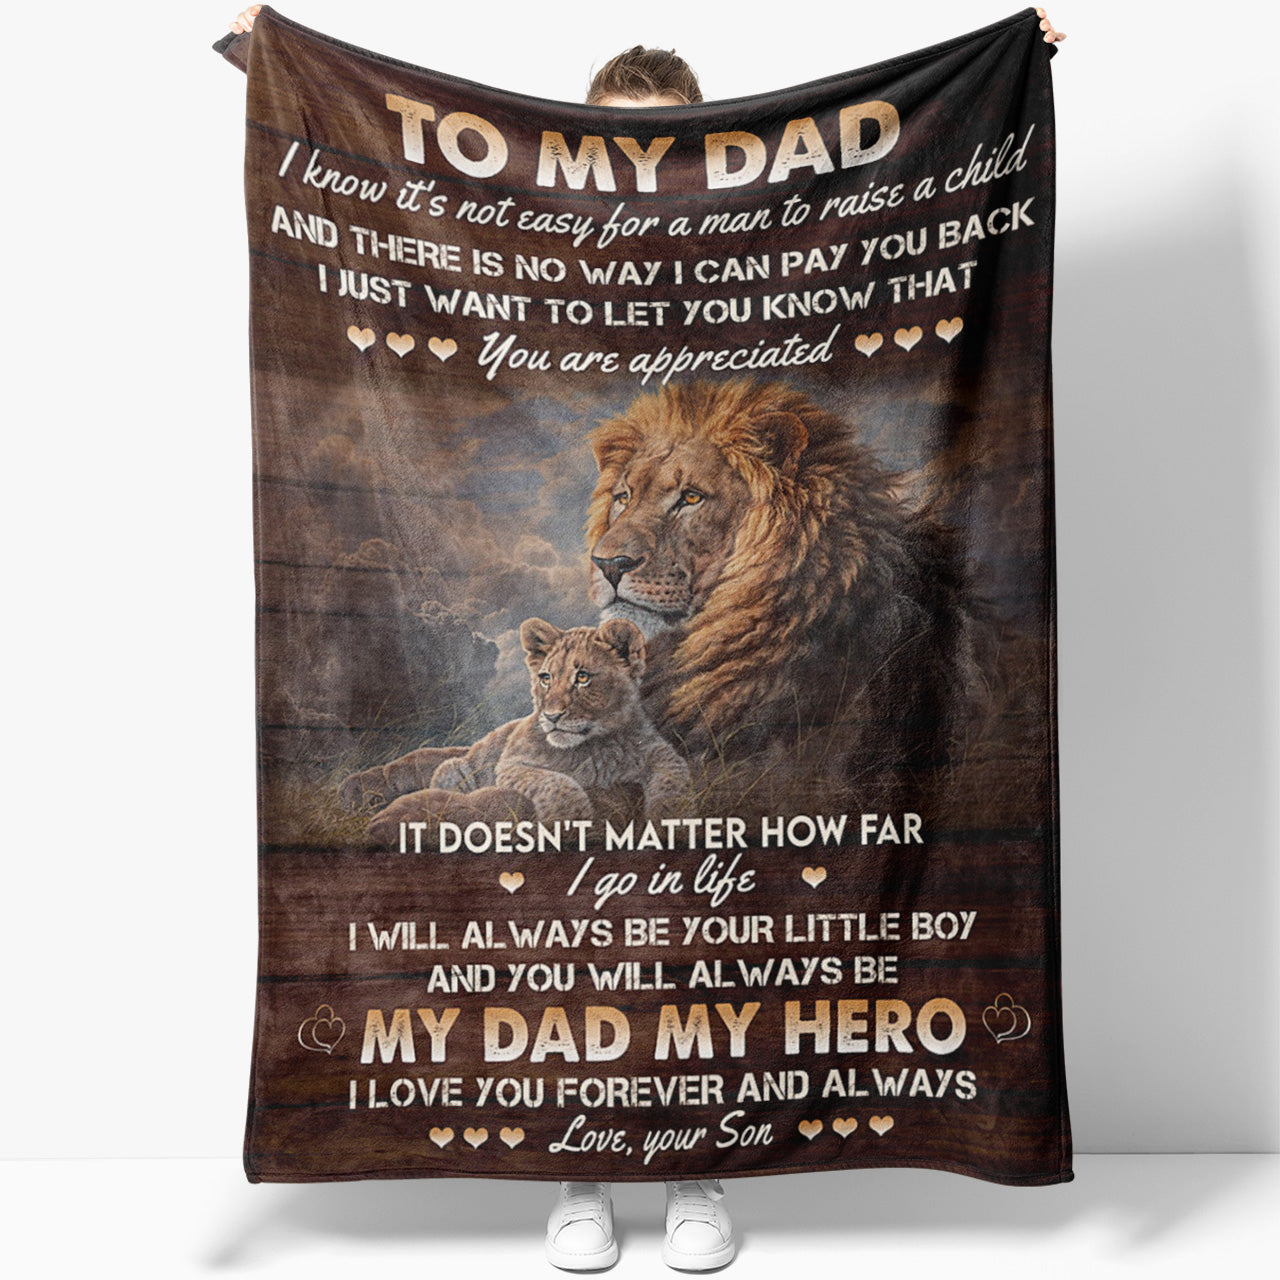 Blanket Thoughtful Gift Ideas For Dad, Funny Dad Gifts